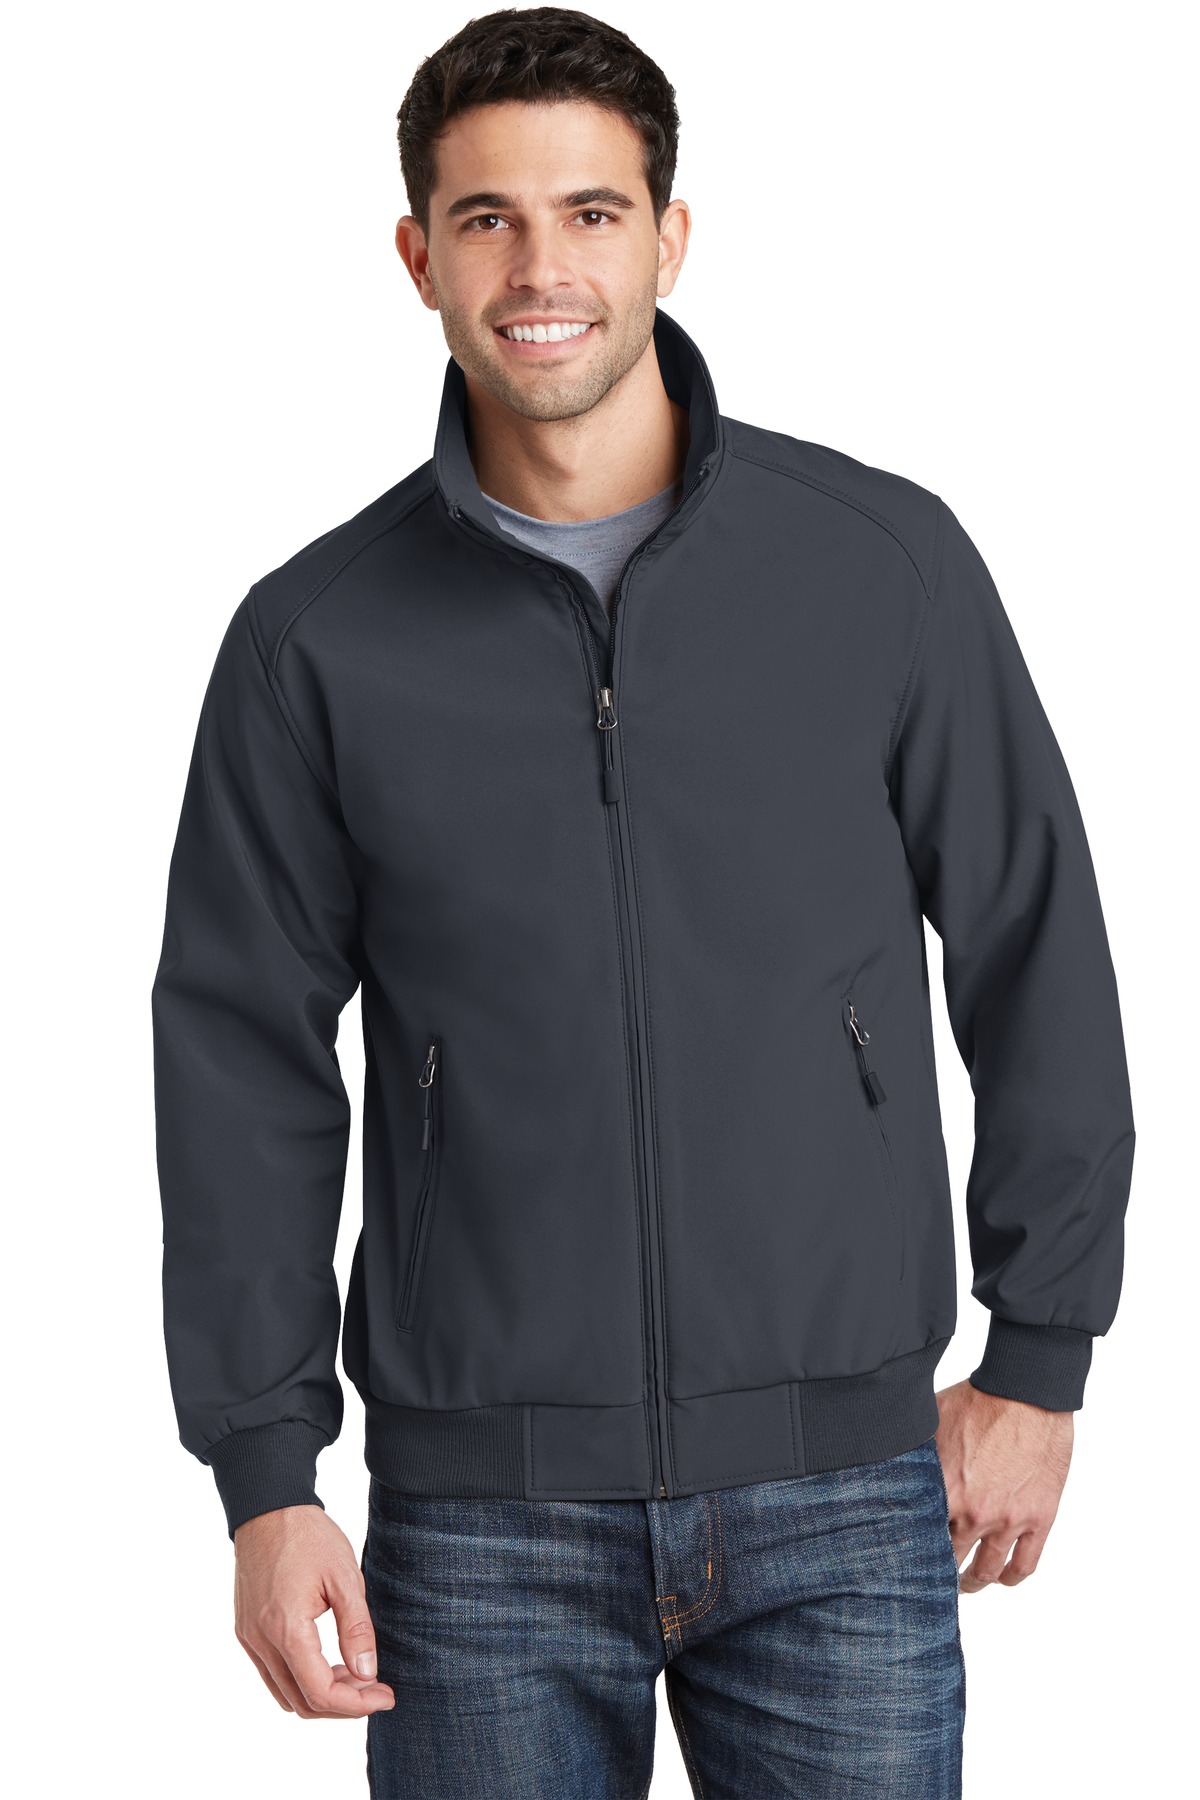 Port Authority J337 - Soft Shell Bomber Jacket - Outerwear